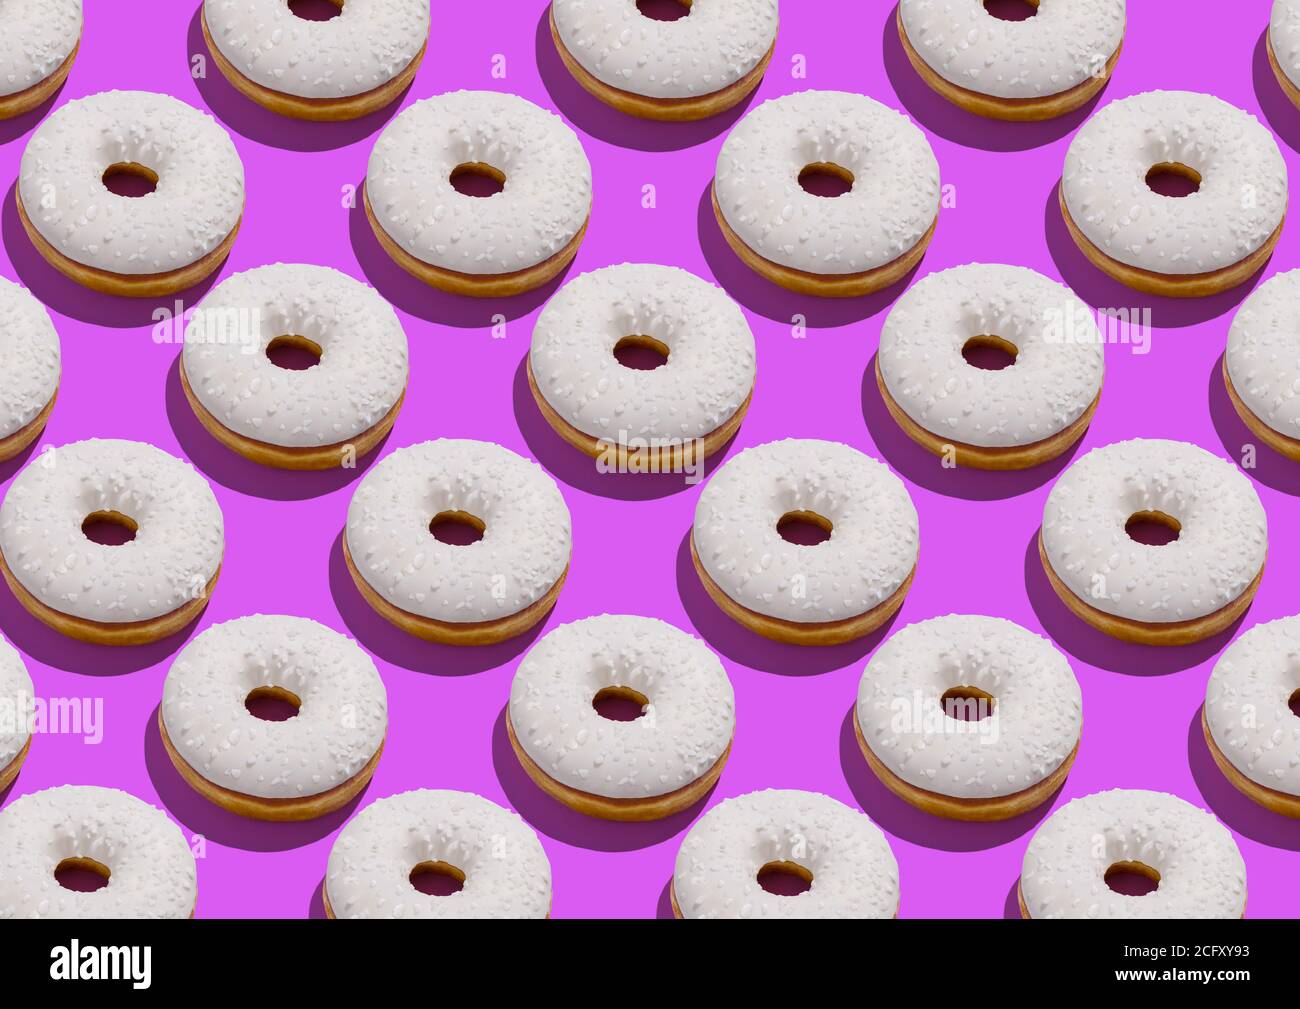 Delicious donuts with white sugary icing and sprinkles over neon purple background Stock Photo